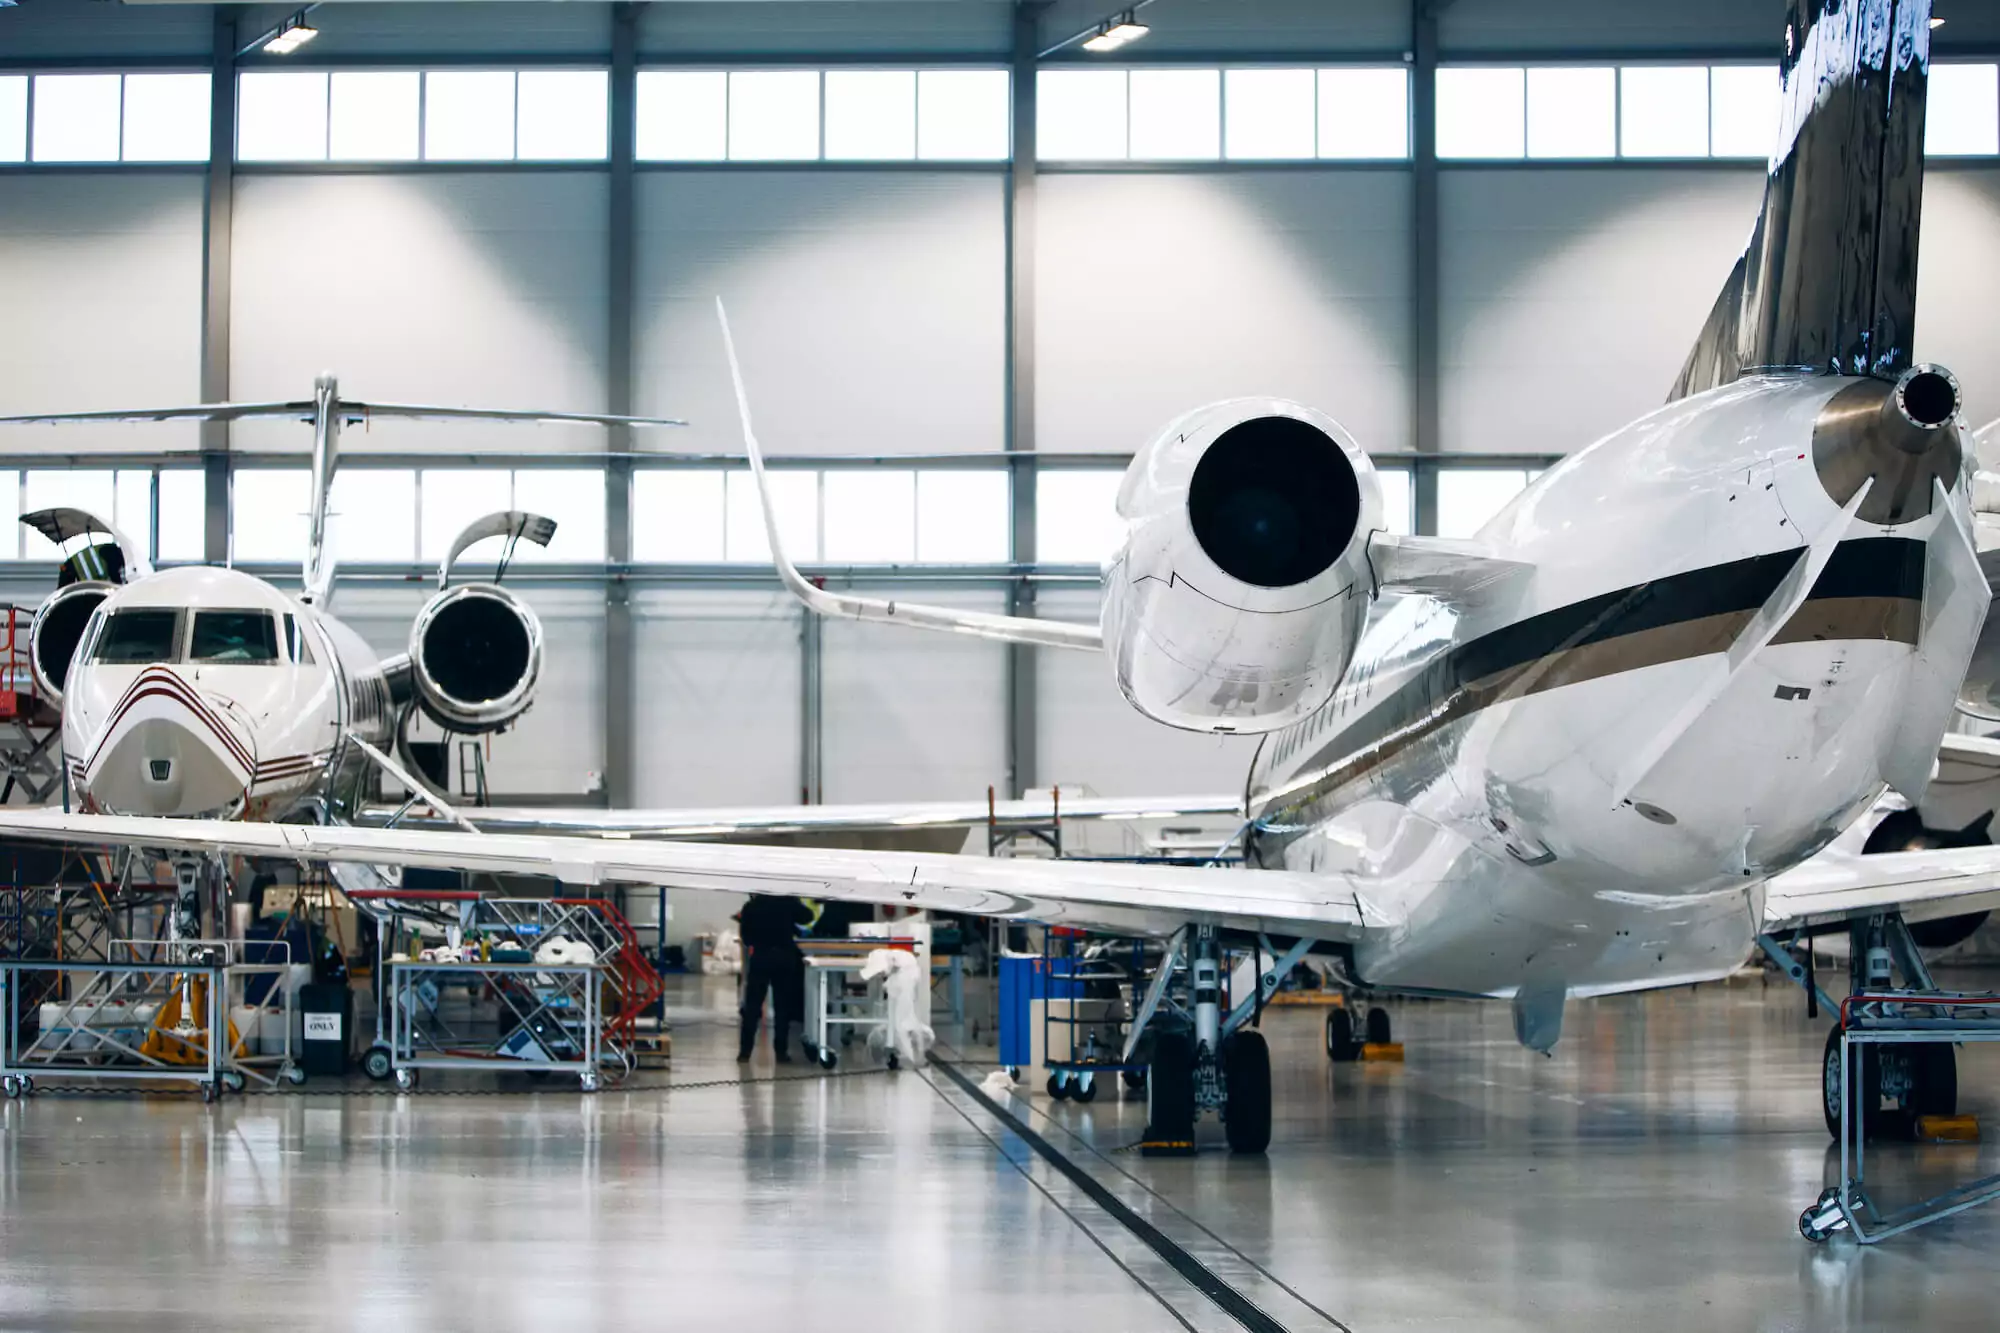 Private Jet Maintenance: Things to Consider and Costs